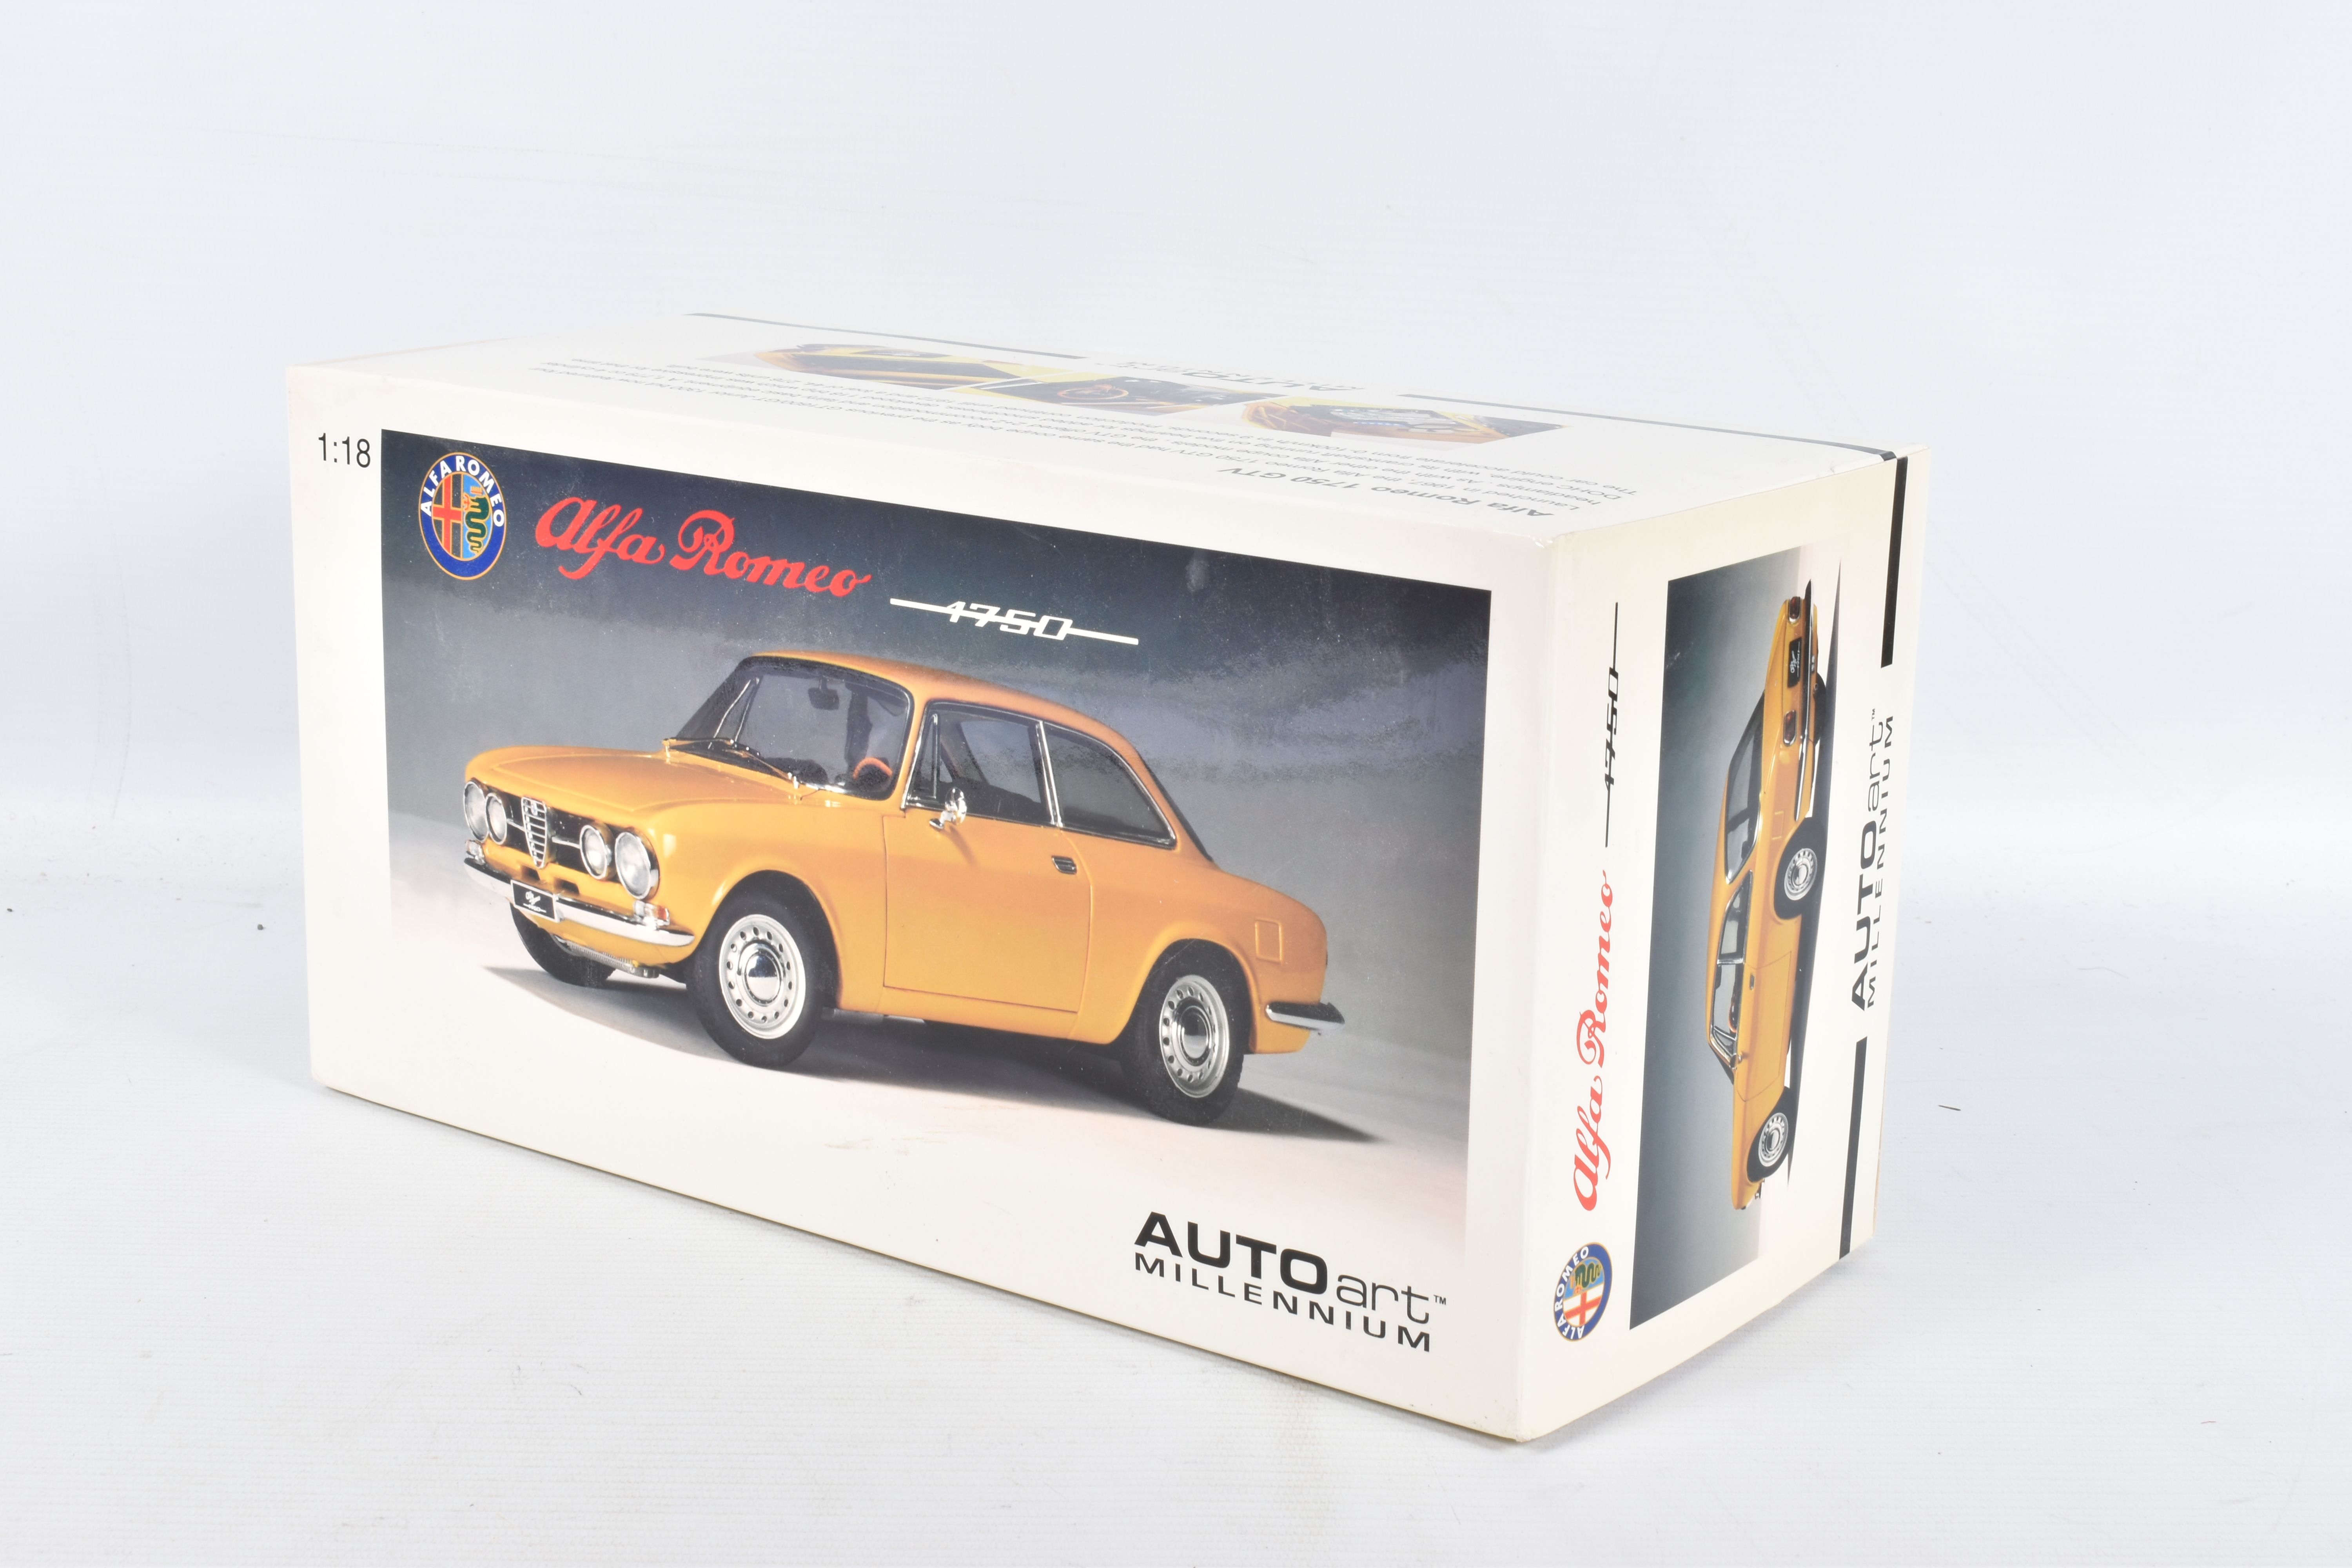 A BOXED AUTOART ALFA ROMEO 1750 GTV SCALE 1:18 MODEL VEHICLE, numbered 70108, painted mustard